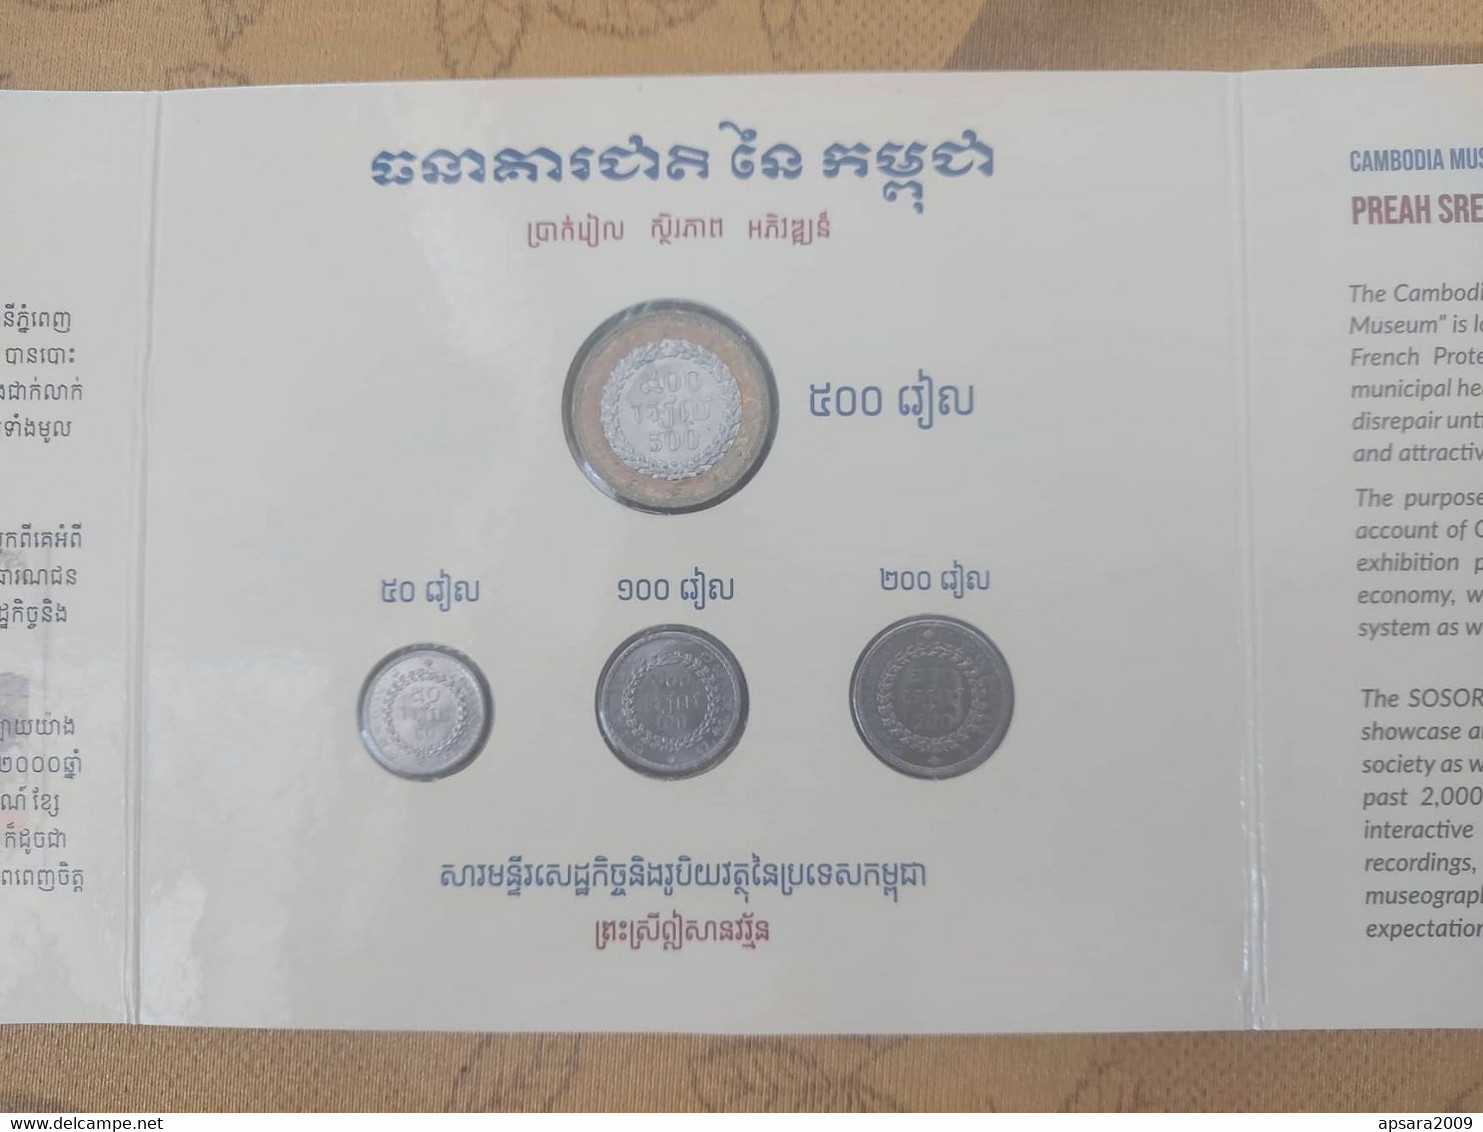 CAMBODGE / Souvenir cover of Cambodian coins made by Cambodia Coin Museum.